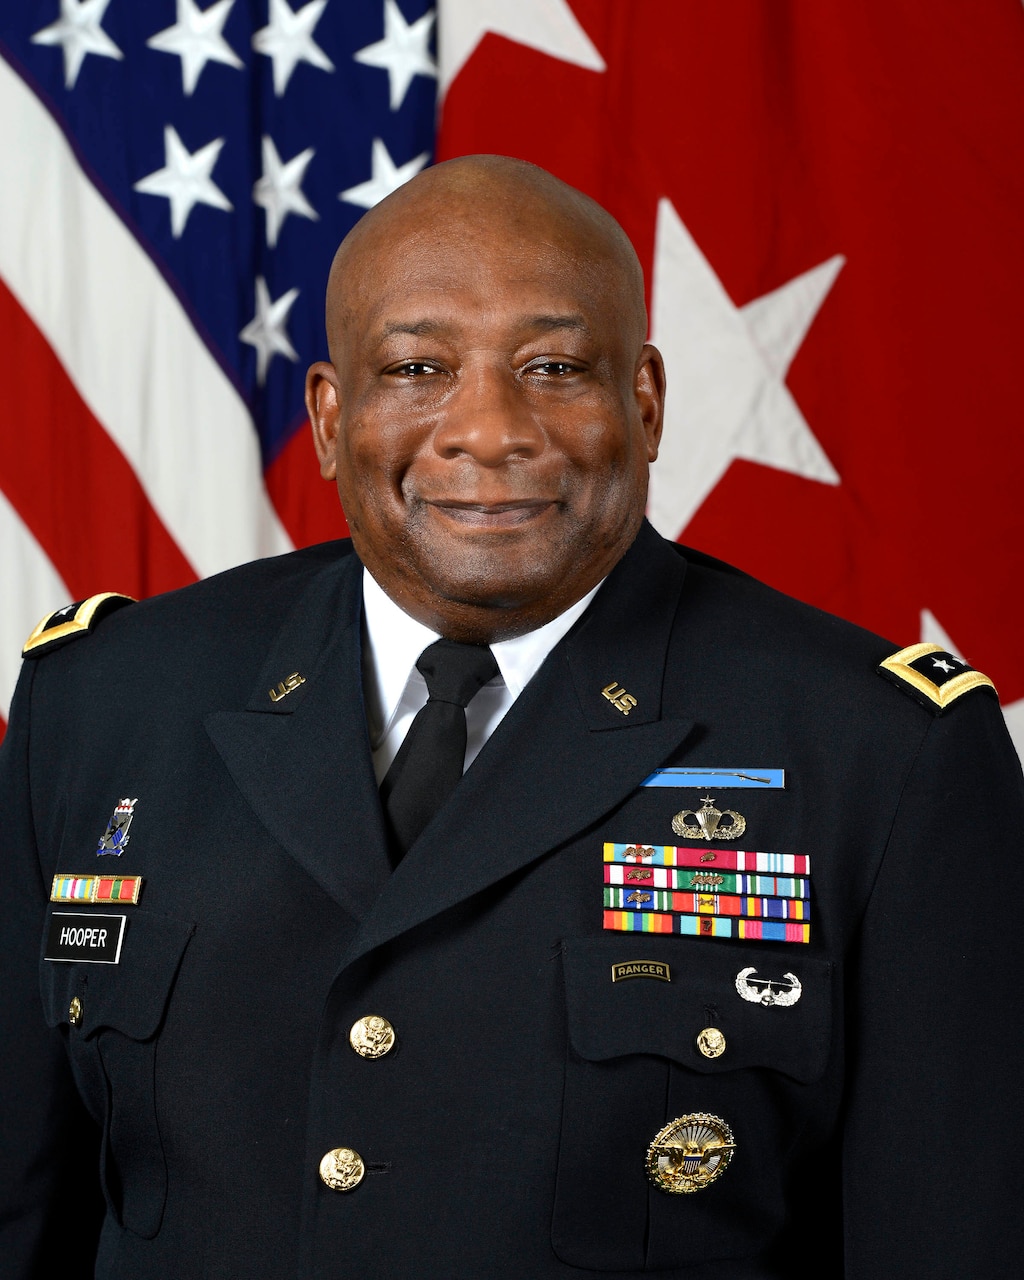 Army Lt. Gen. Charles W. Hooper, director of the Defense Security Cooperation Agency. Army photo by Monica King